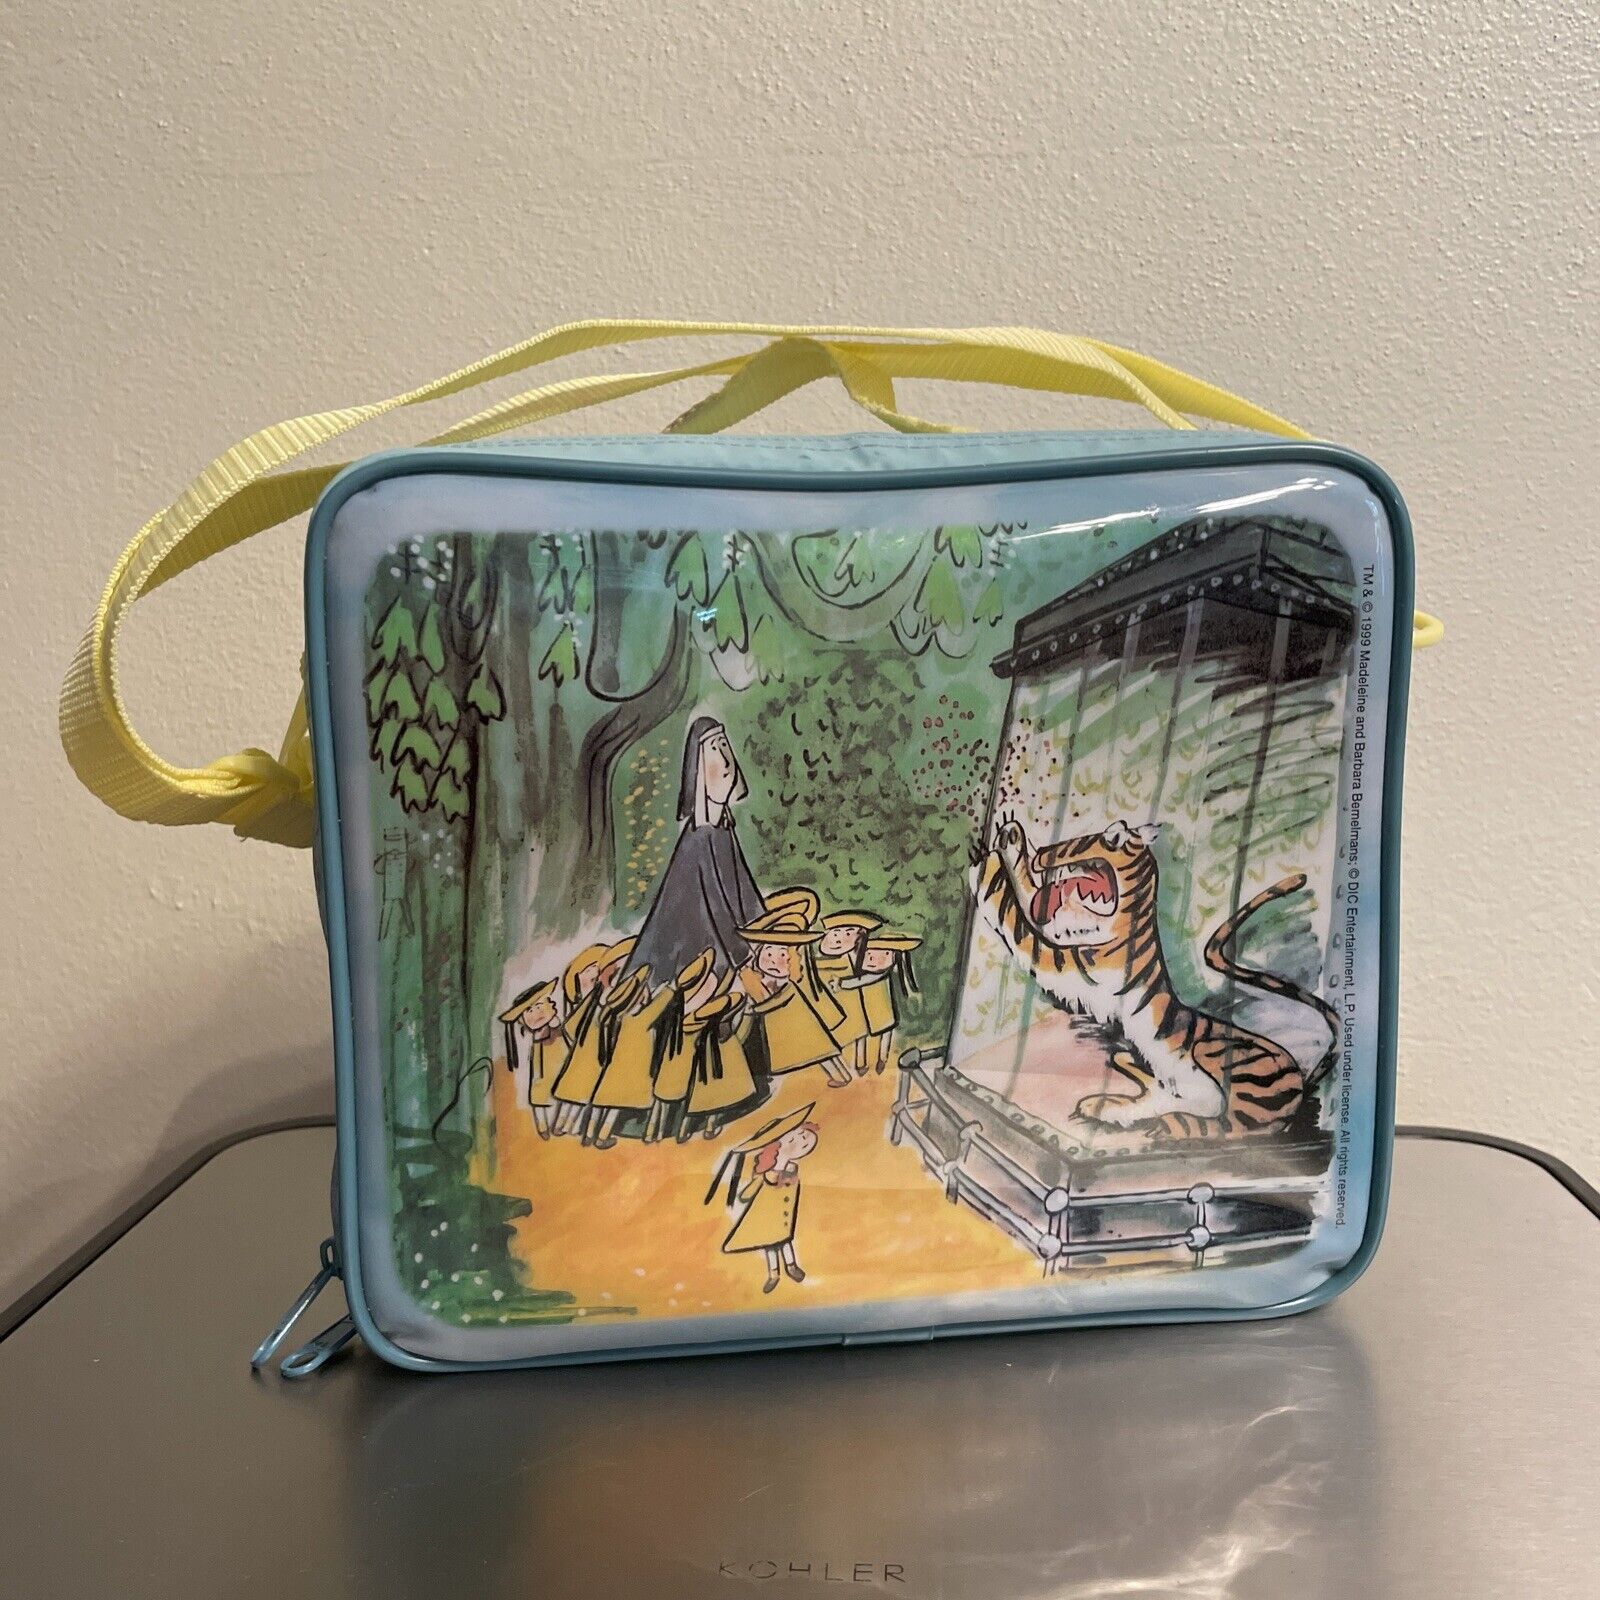 Madeline lunch box 1999